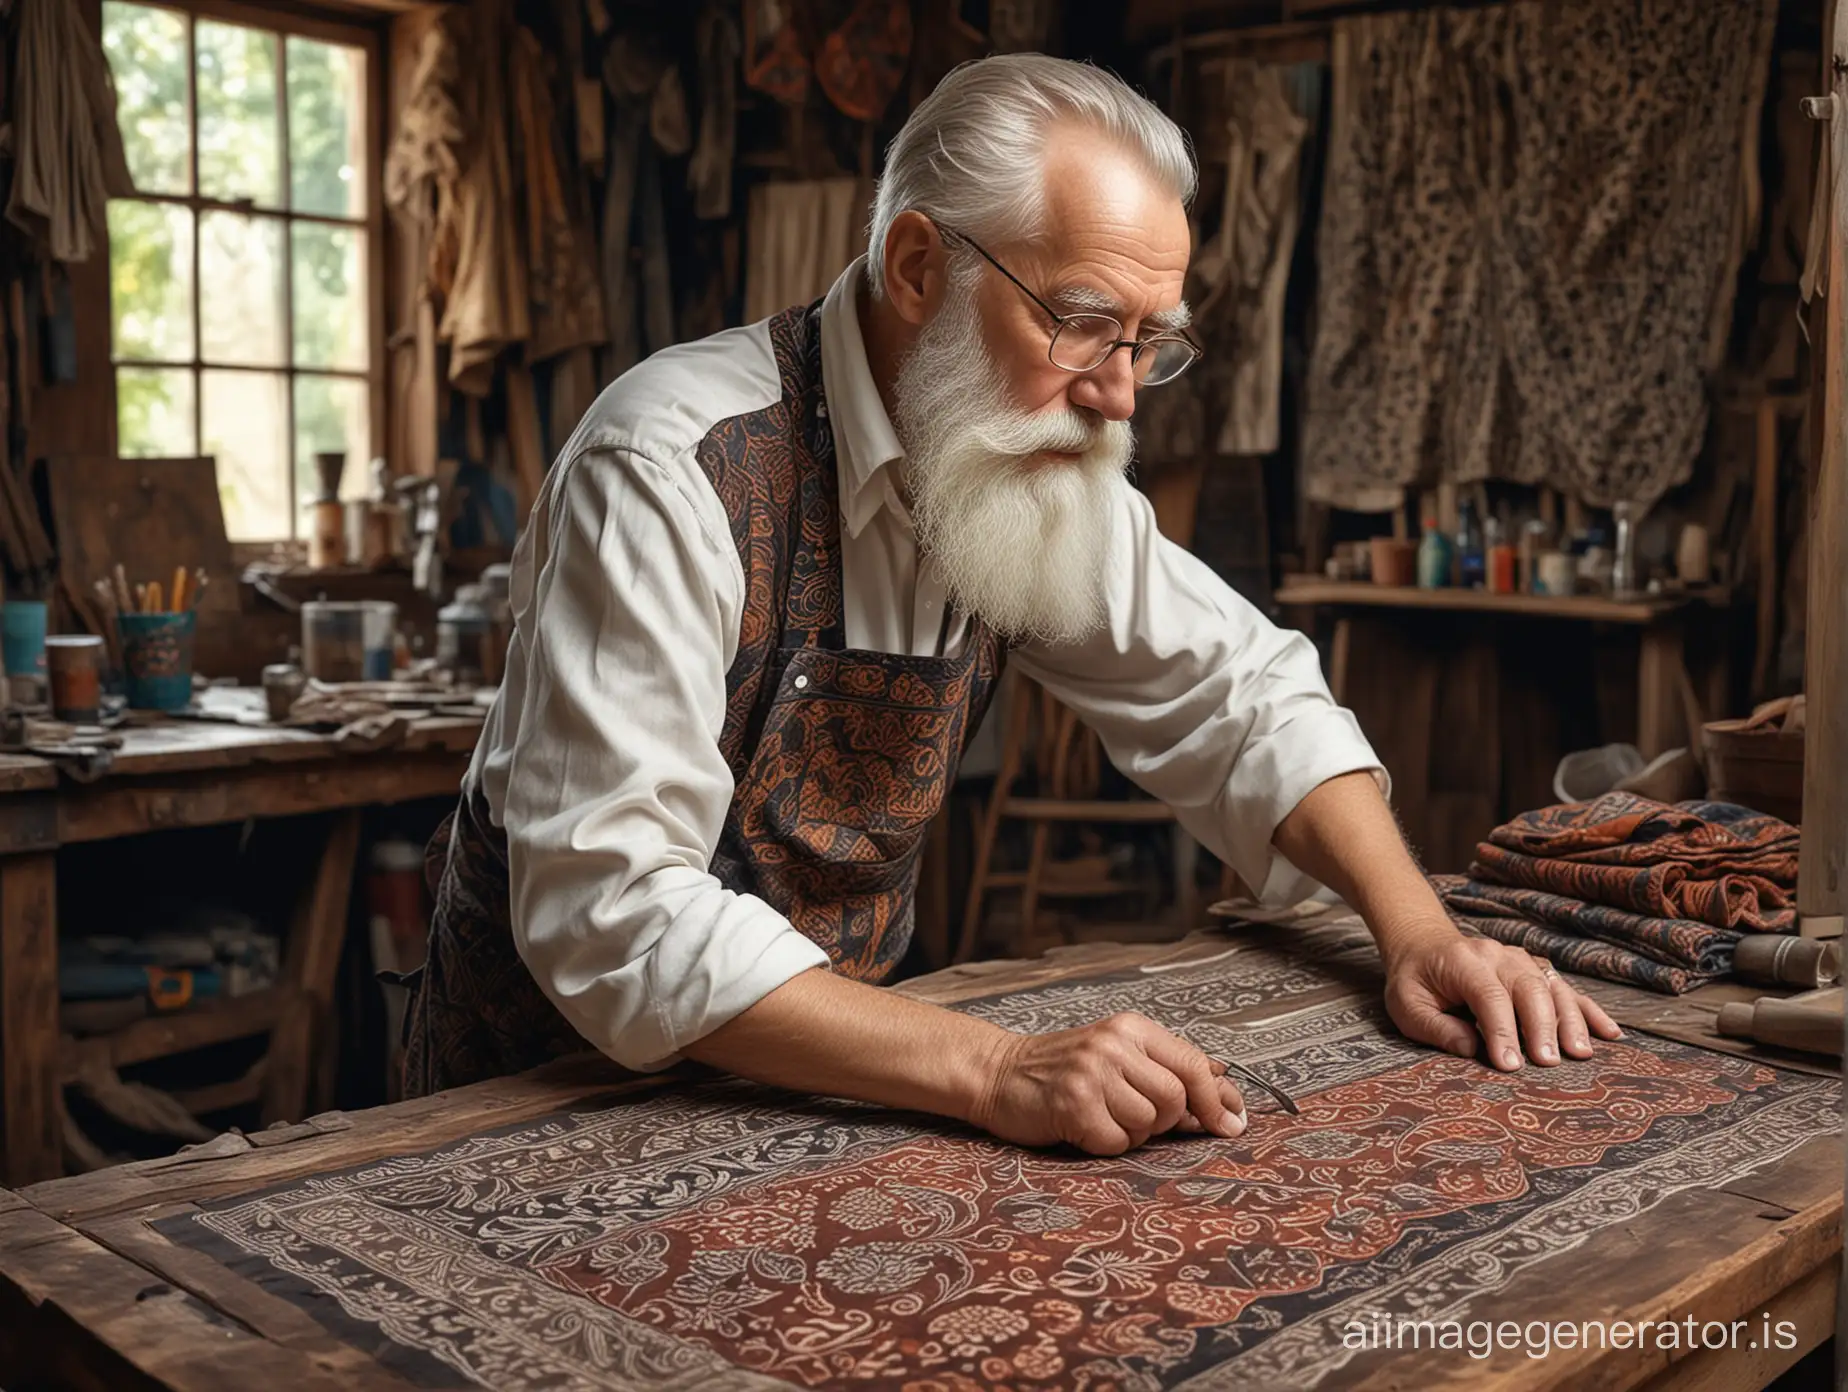 hyper realistic image of a white beard old man working with batik printing fabric in his workshop